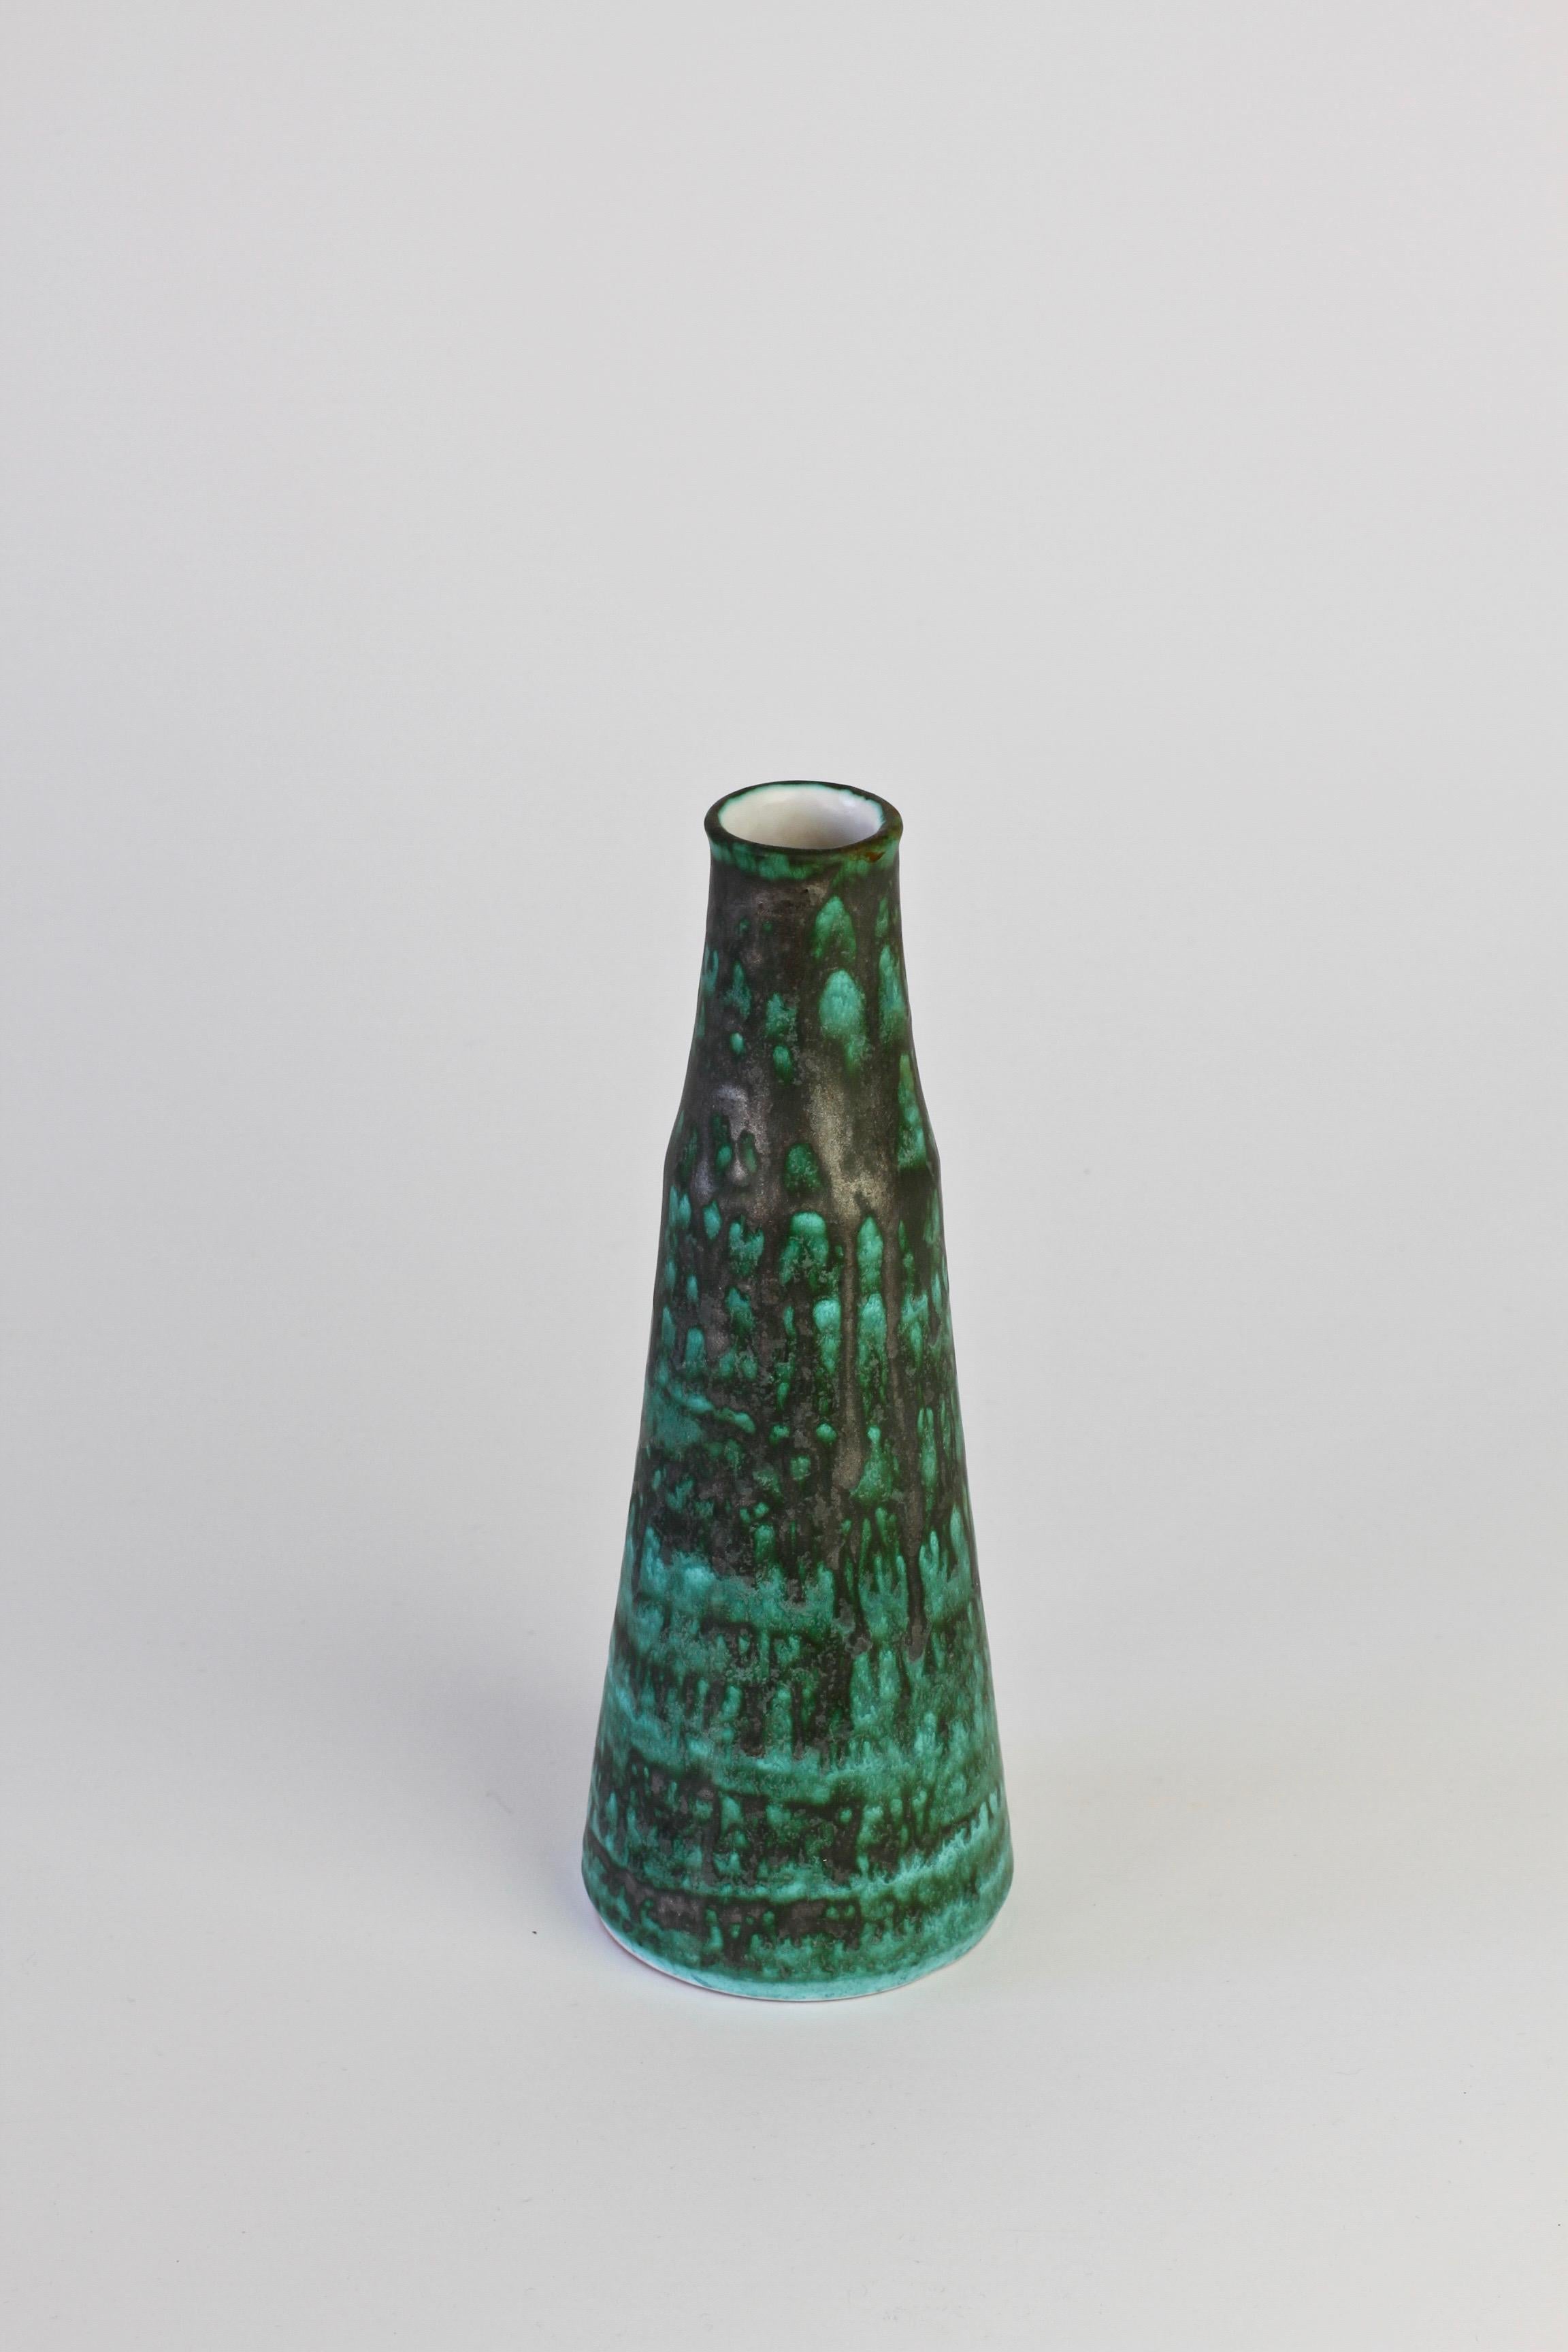 Beautiful and collectable little midcentury West German vase by Waechtersbach, circa 1955 in graphite grey and green.

This is a hard to find vase. Similar, in style, to a variation on the very collectible 'Ankara' range produced by Carstens